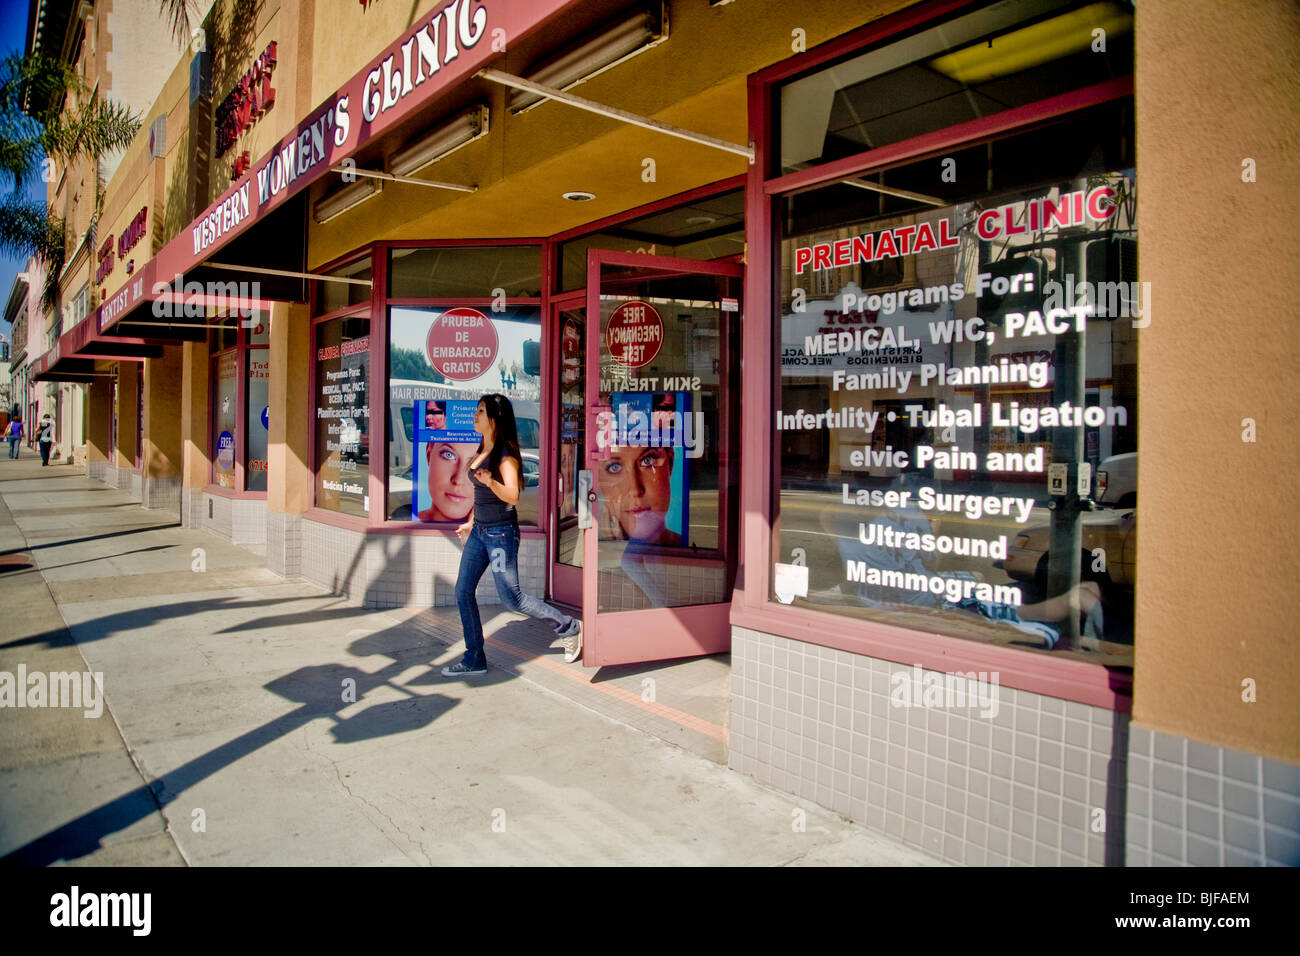 A storefront womens' health clinic lists services in both English and Spanish or 'Spanglish' on window signs in a 'barrio' in CA Stock Photo